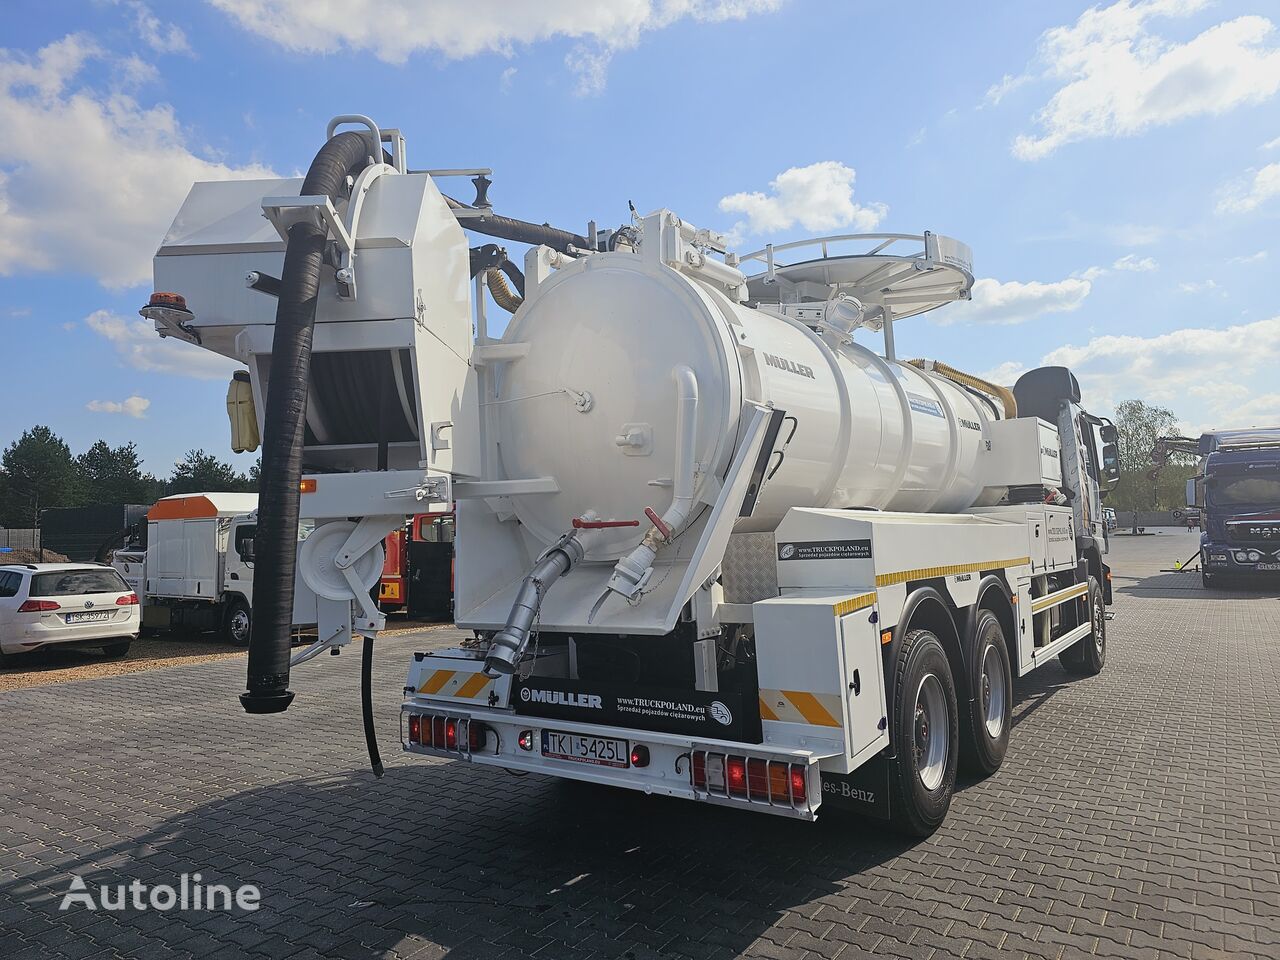 Mercedes-Benz CANALMASTER WUKO MULLER KOMBI FOR CHANNEL CLEANING vacuum truck